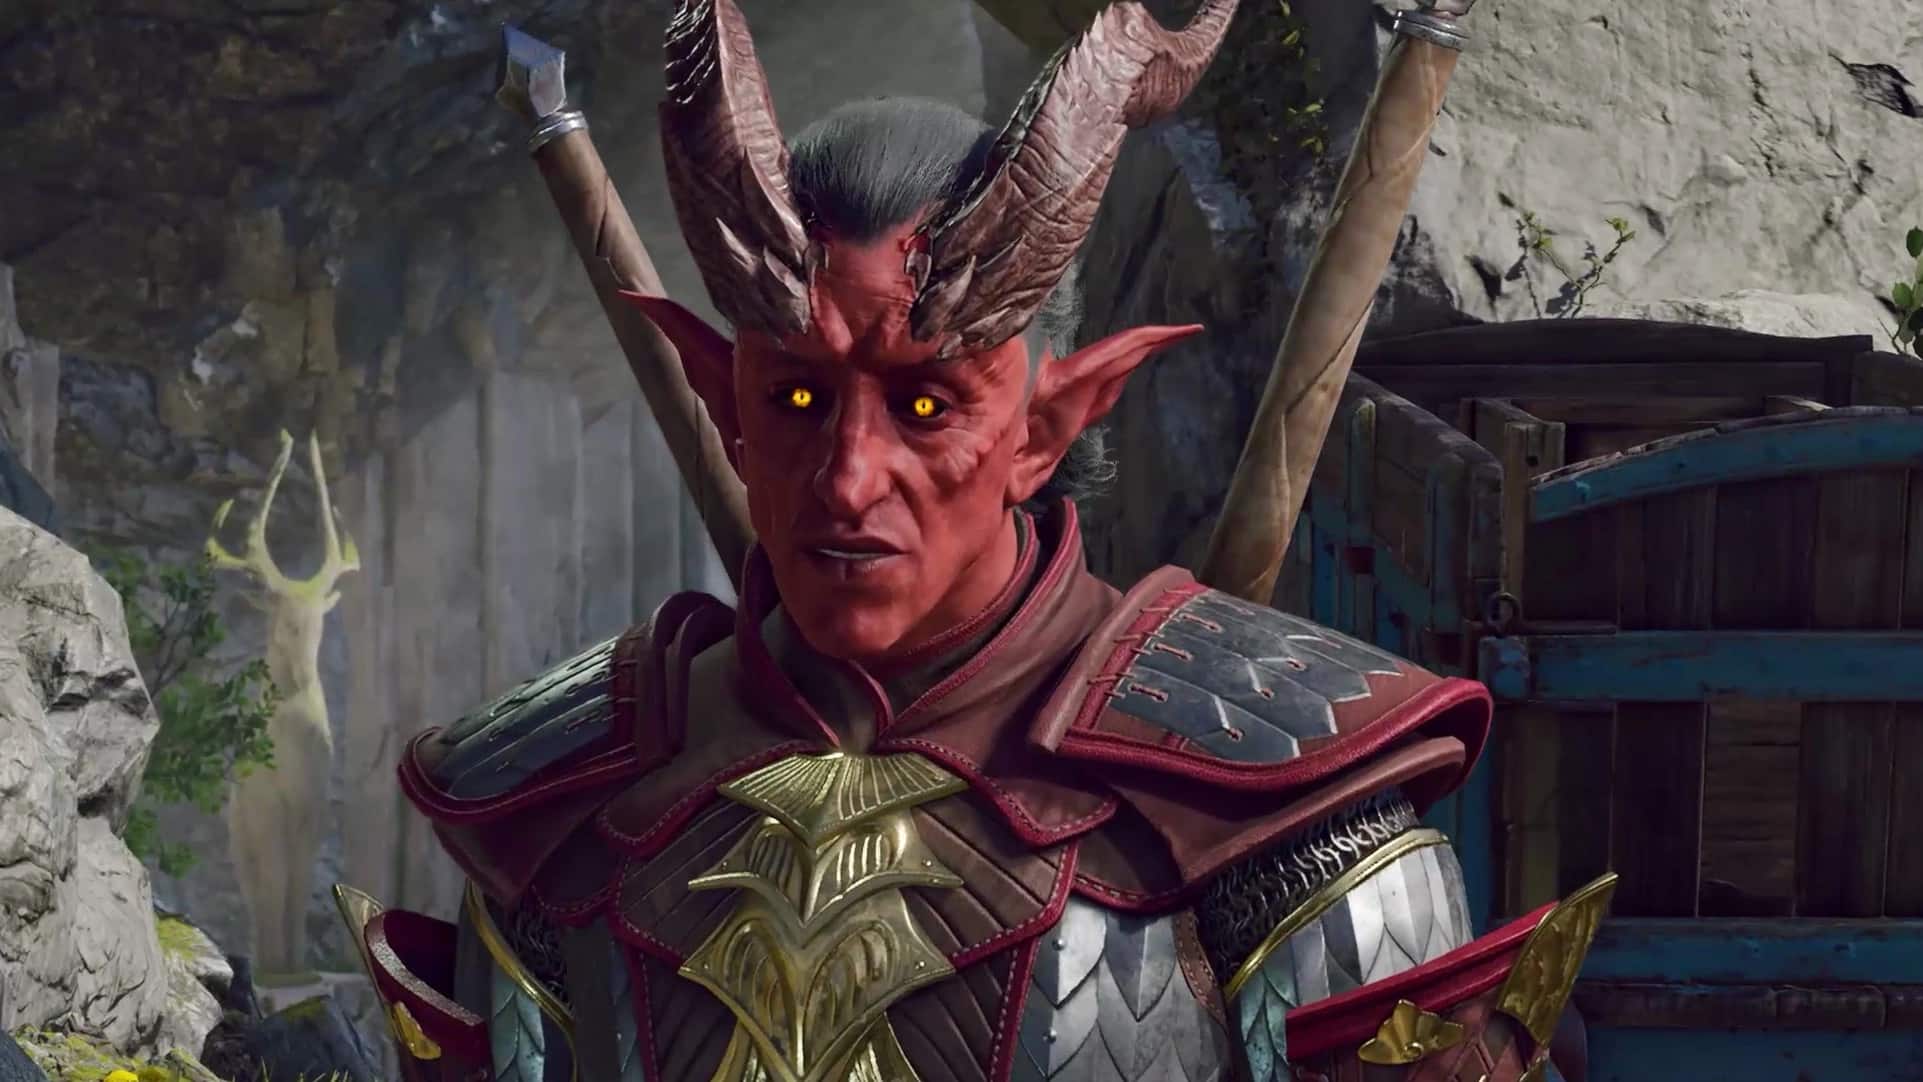 Baldur's Gate 3 Release Time: When Can You Install and Play the Game?